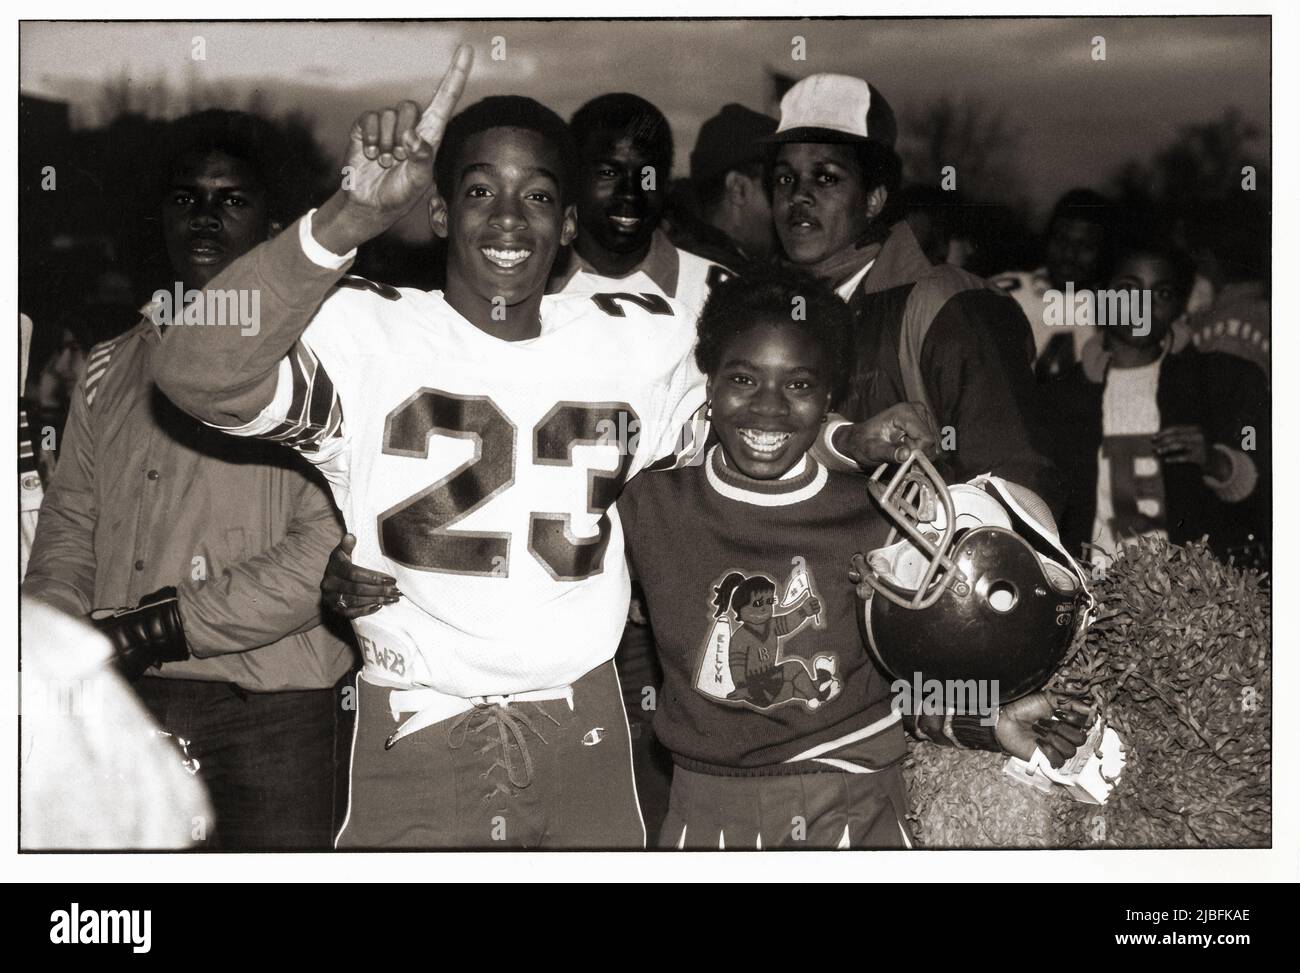 After winning ther game, a Bayside High School football player posed for a photo with is cheerleader girlfriend. In Brooklyn, New York in 1983 Stock Photo